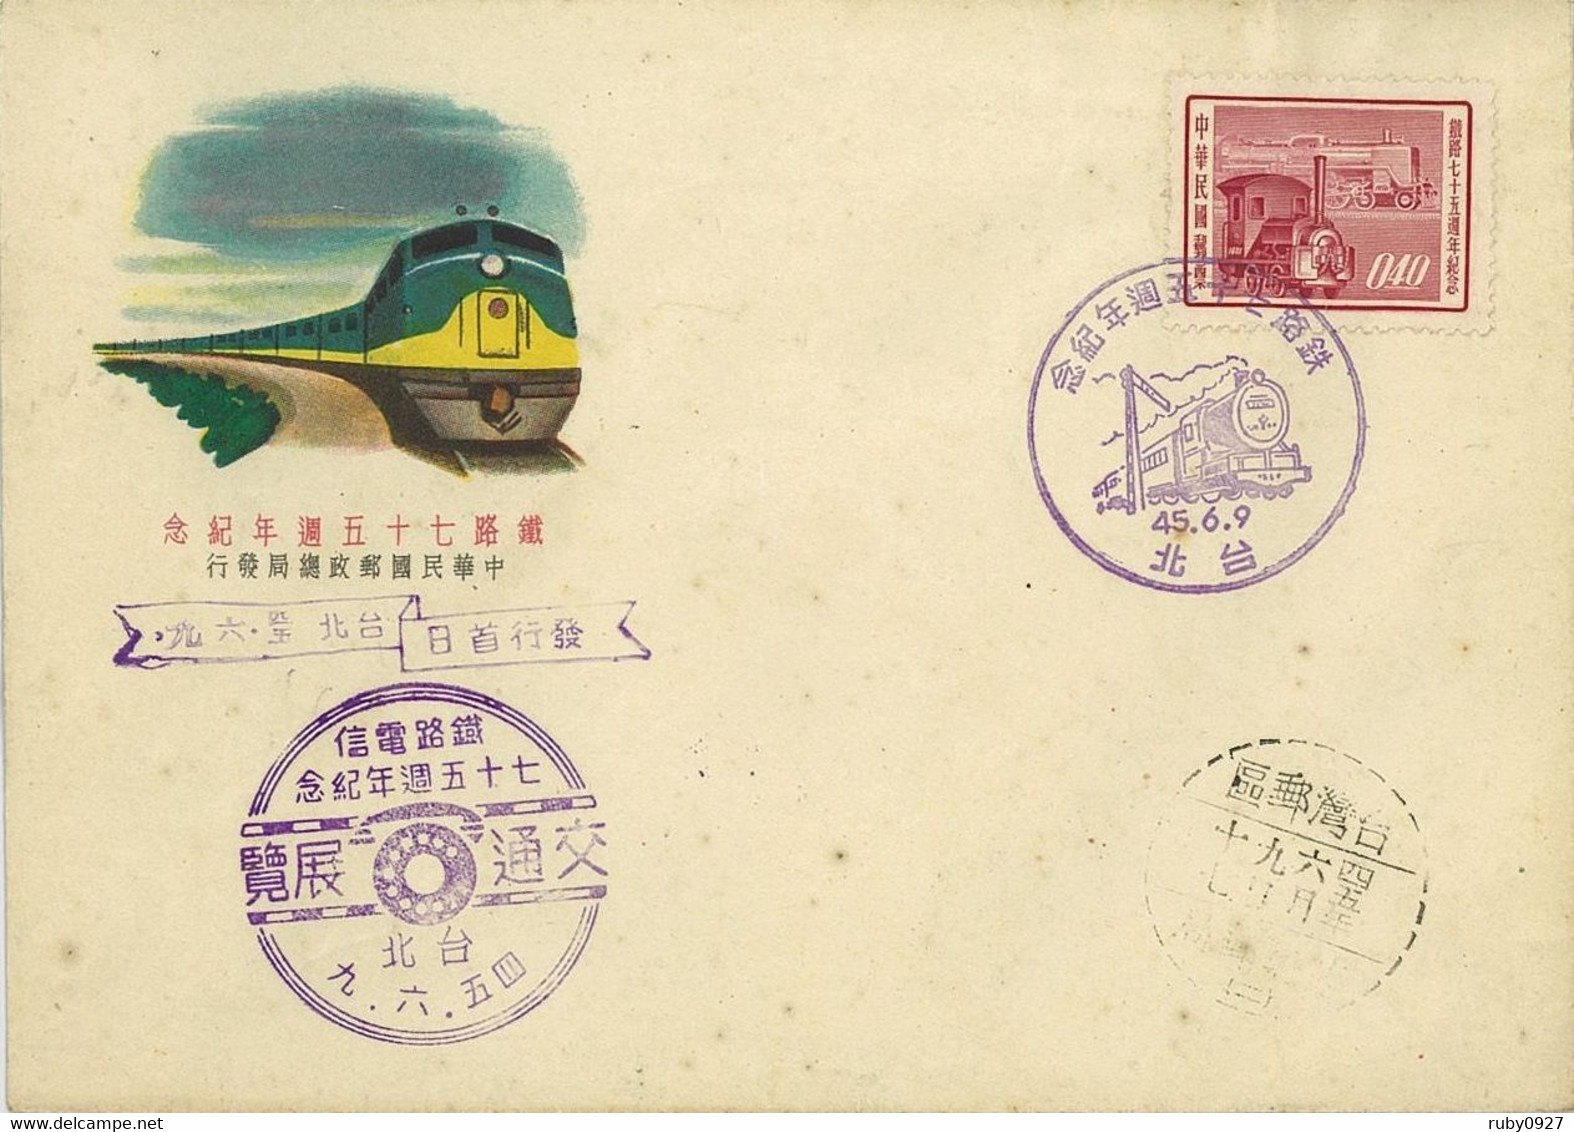 TAIWAN 1956 CHINA CHINESE RAILWAY 75TH ANNIVERSAIRY FIRST DAY COVER, TRAIN, TRAINS, LOCOMOTIVE, TRANSPORT - Storia Postale